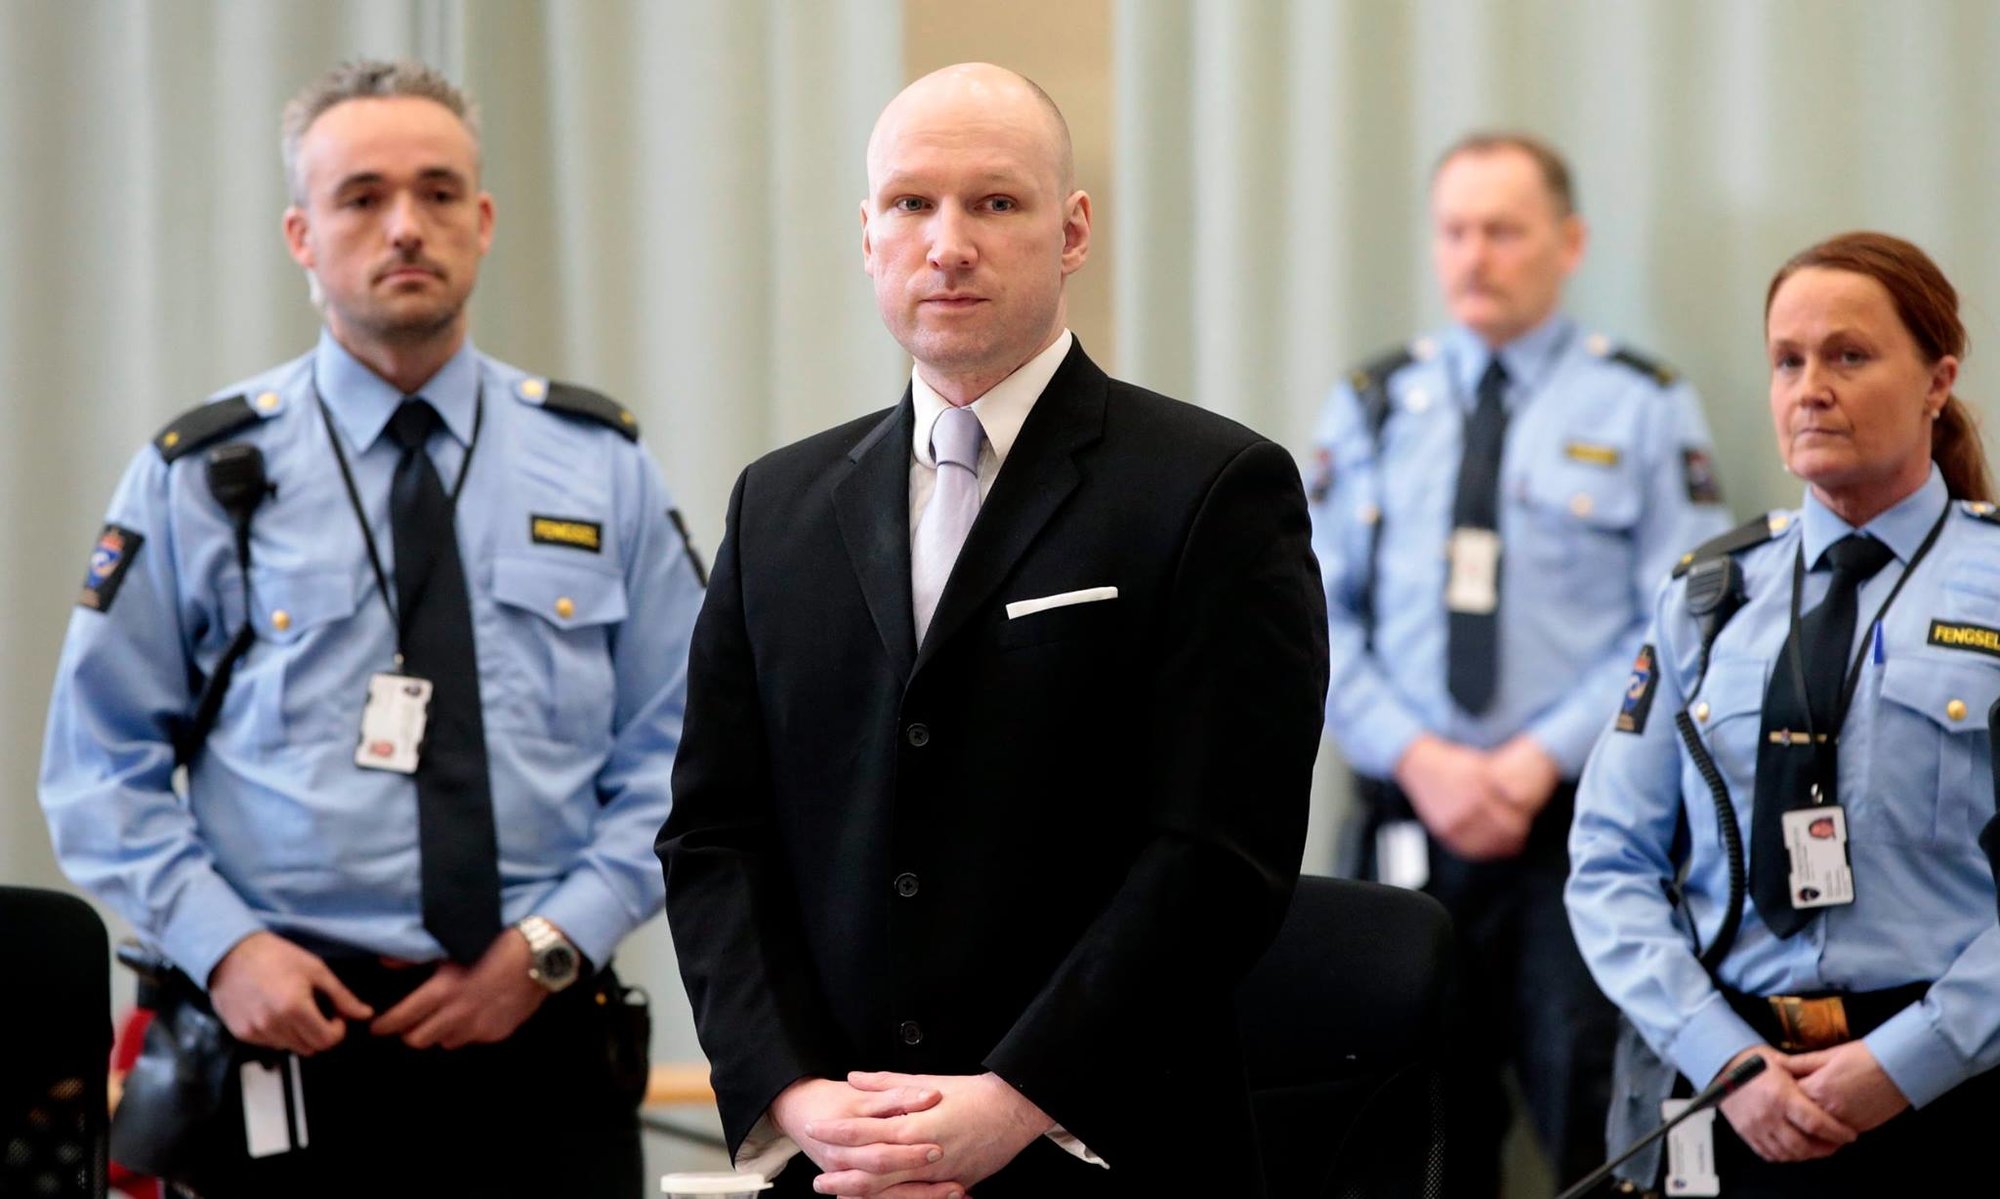 Anders Behring Breivik stands in court in Oslo, Norway, on appeal of his prison sentence as “inhumane.” Photo courtesy of Facebook user SAT.1 Nachrichten.